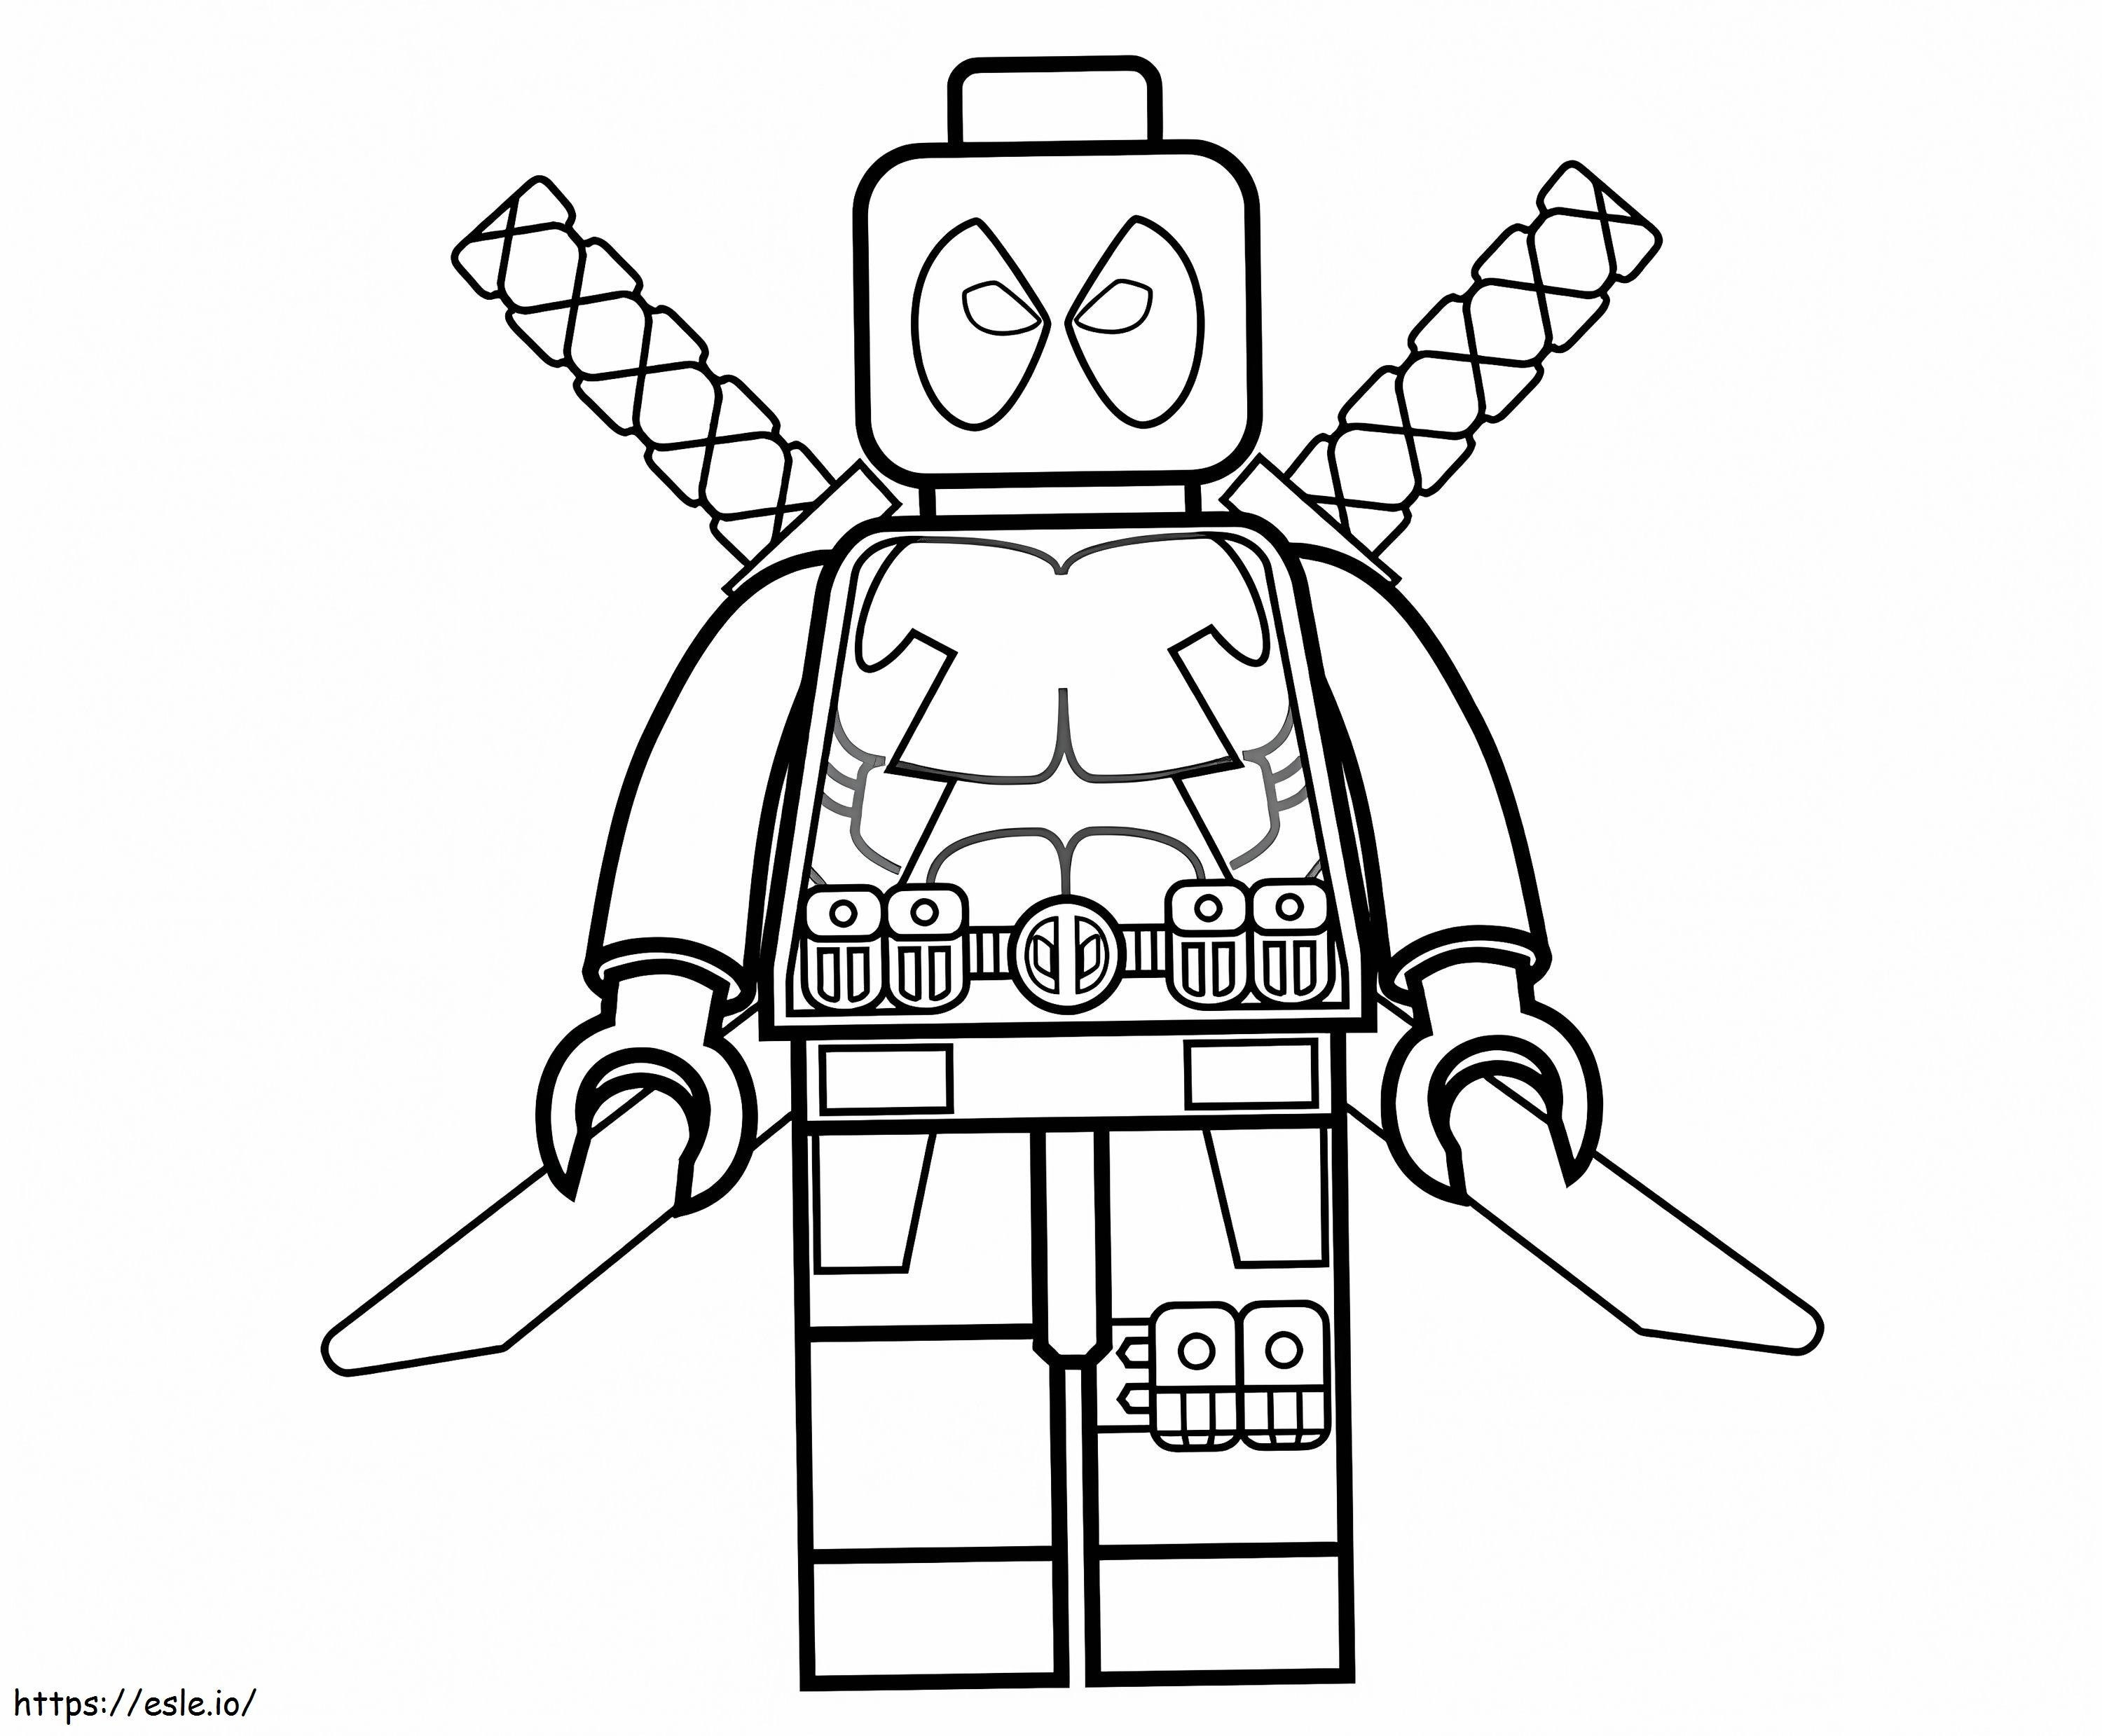 Cool Lego Deadpool coloring page